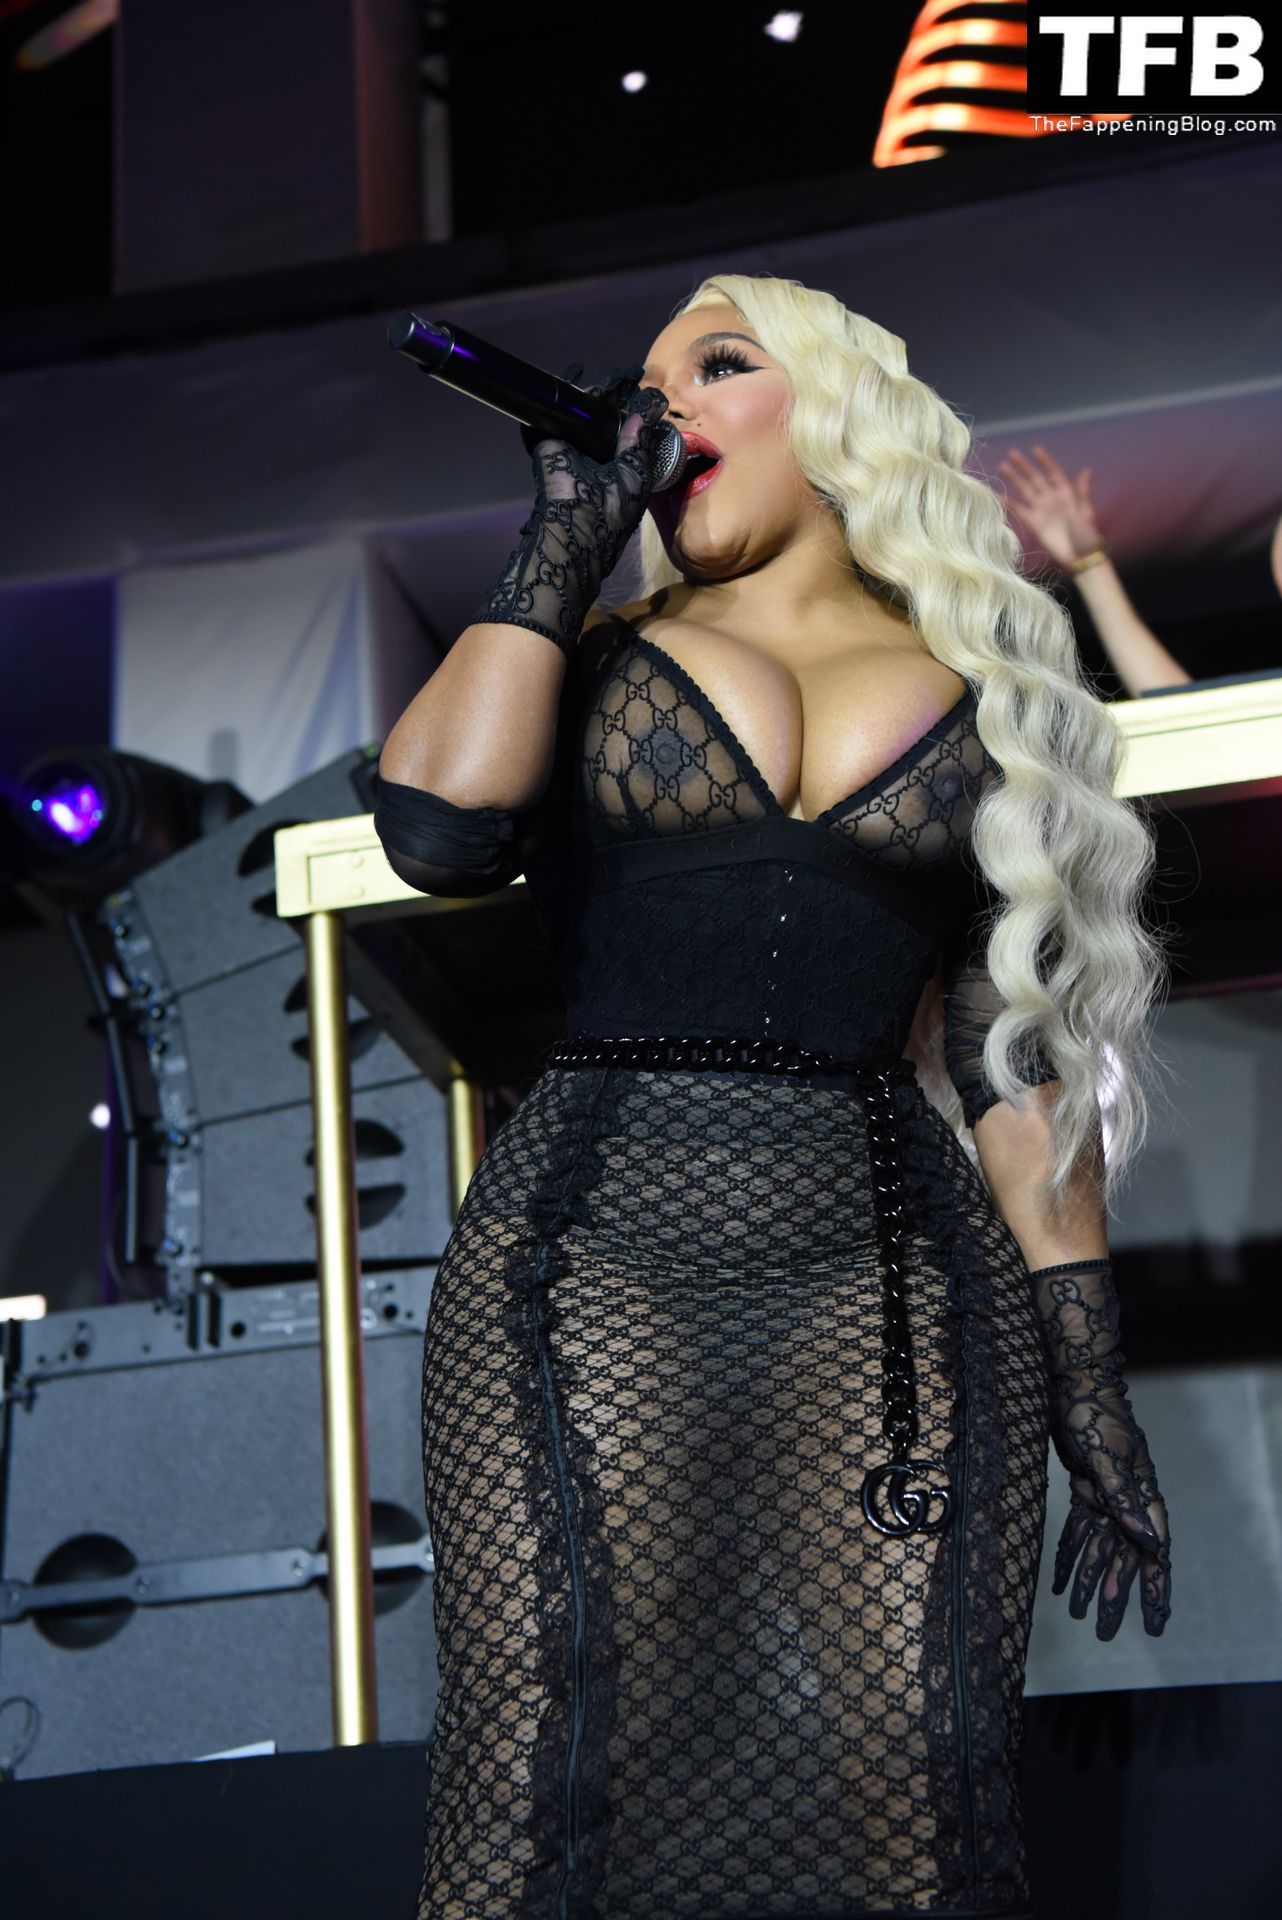 Lil-Kim-See-Through-Nudity-The-Fappening-Blog-13.jpg